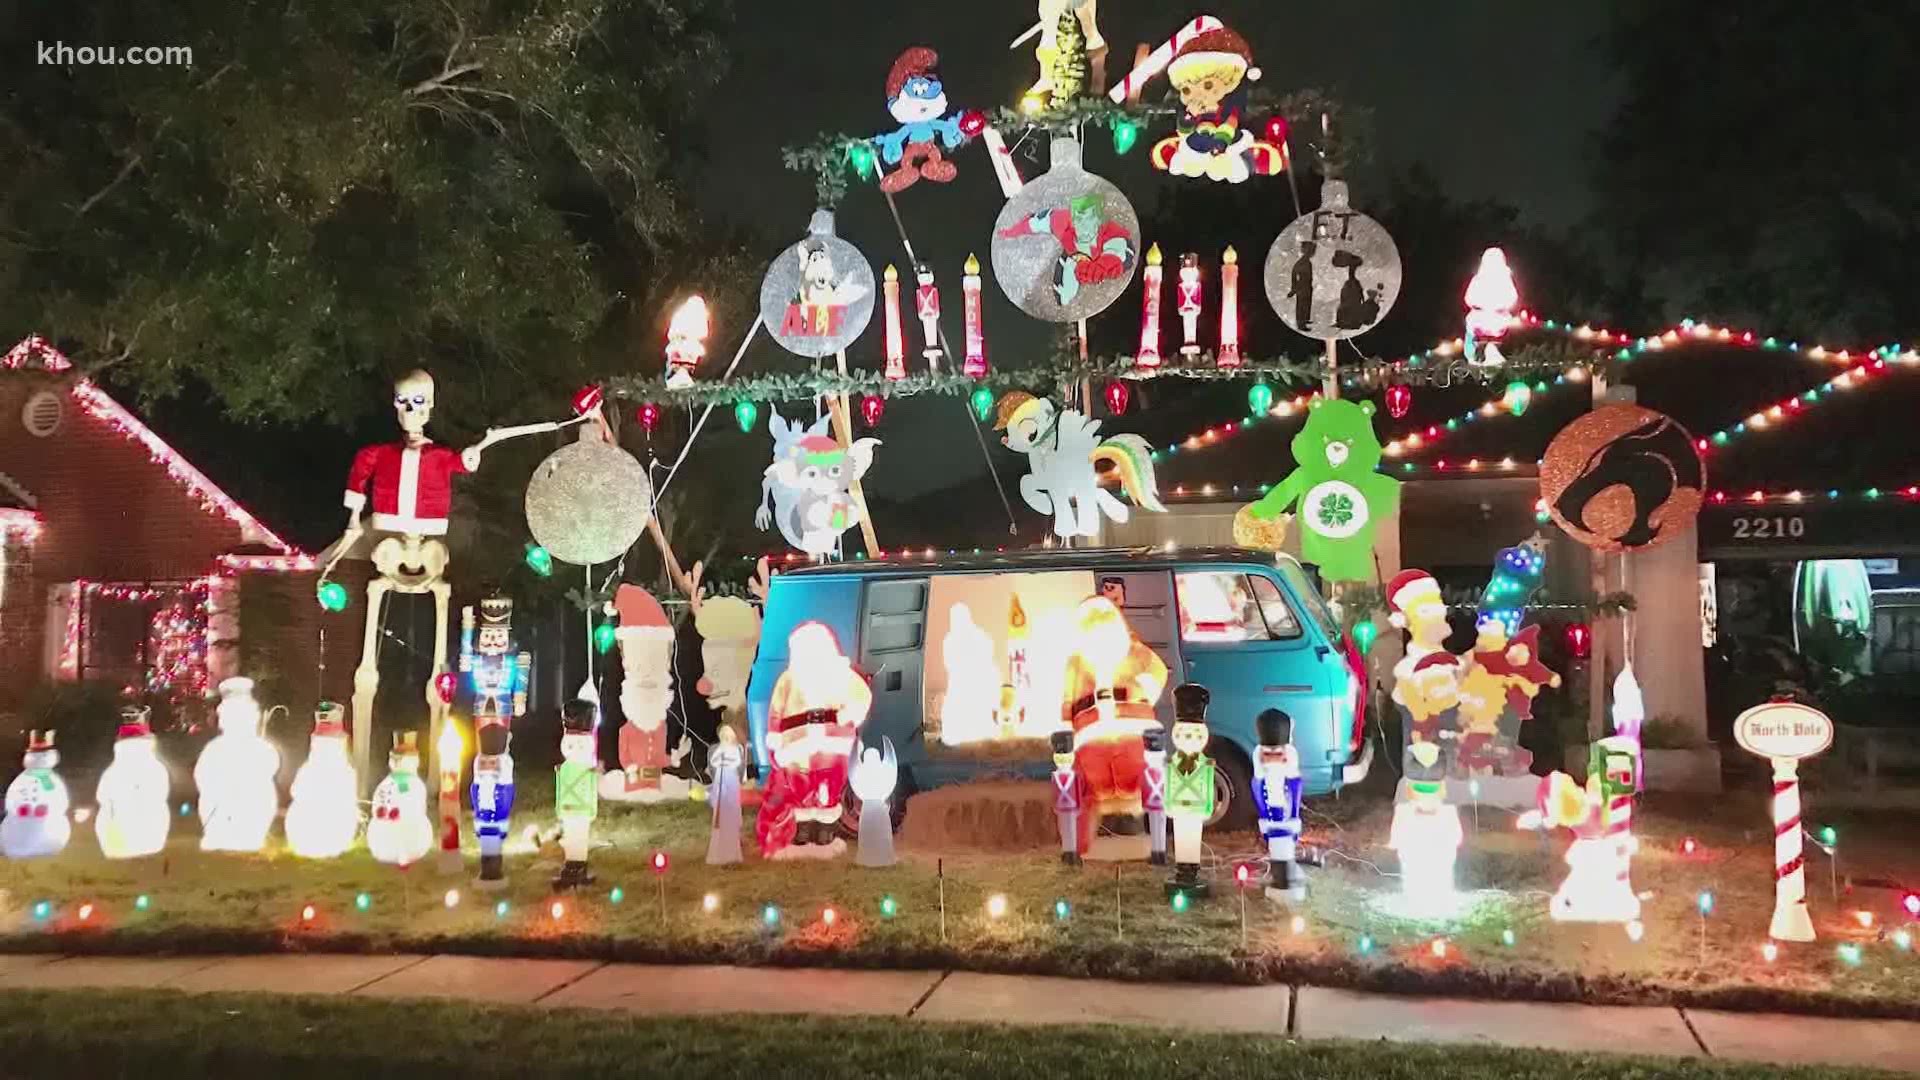 A Fort Bend County family has gone above and beyond this year with their Christmas decorations standing taller than their house.